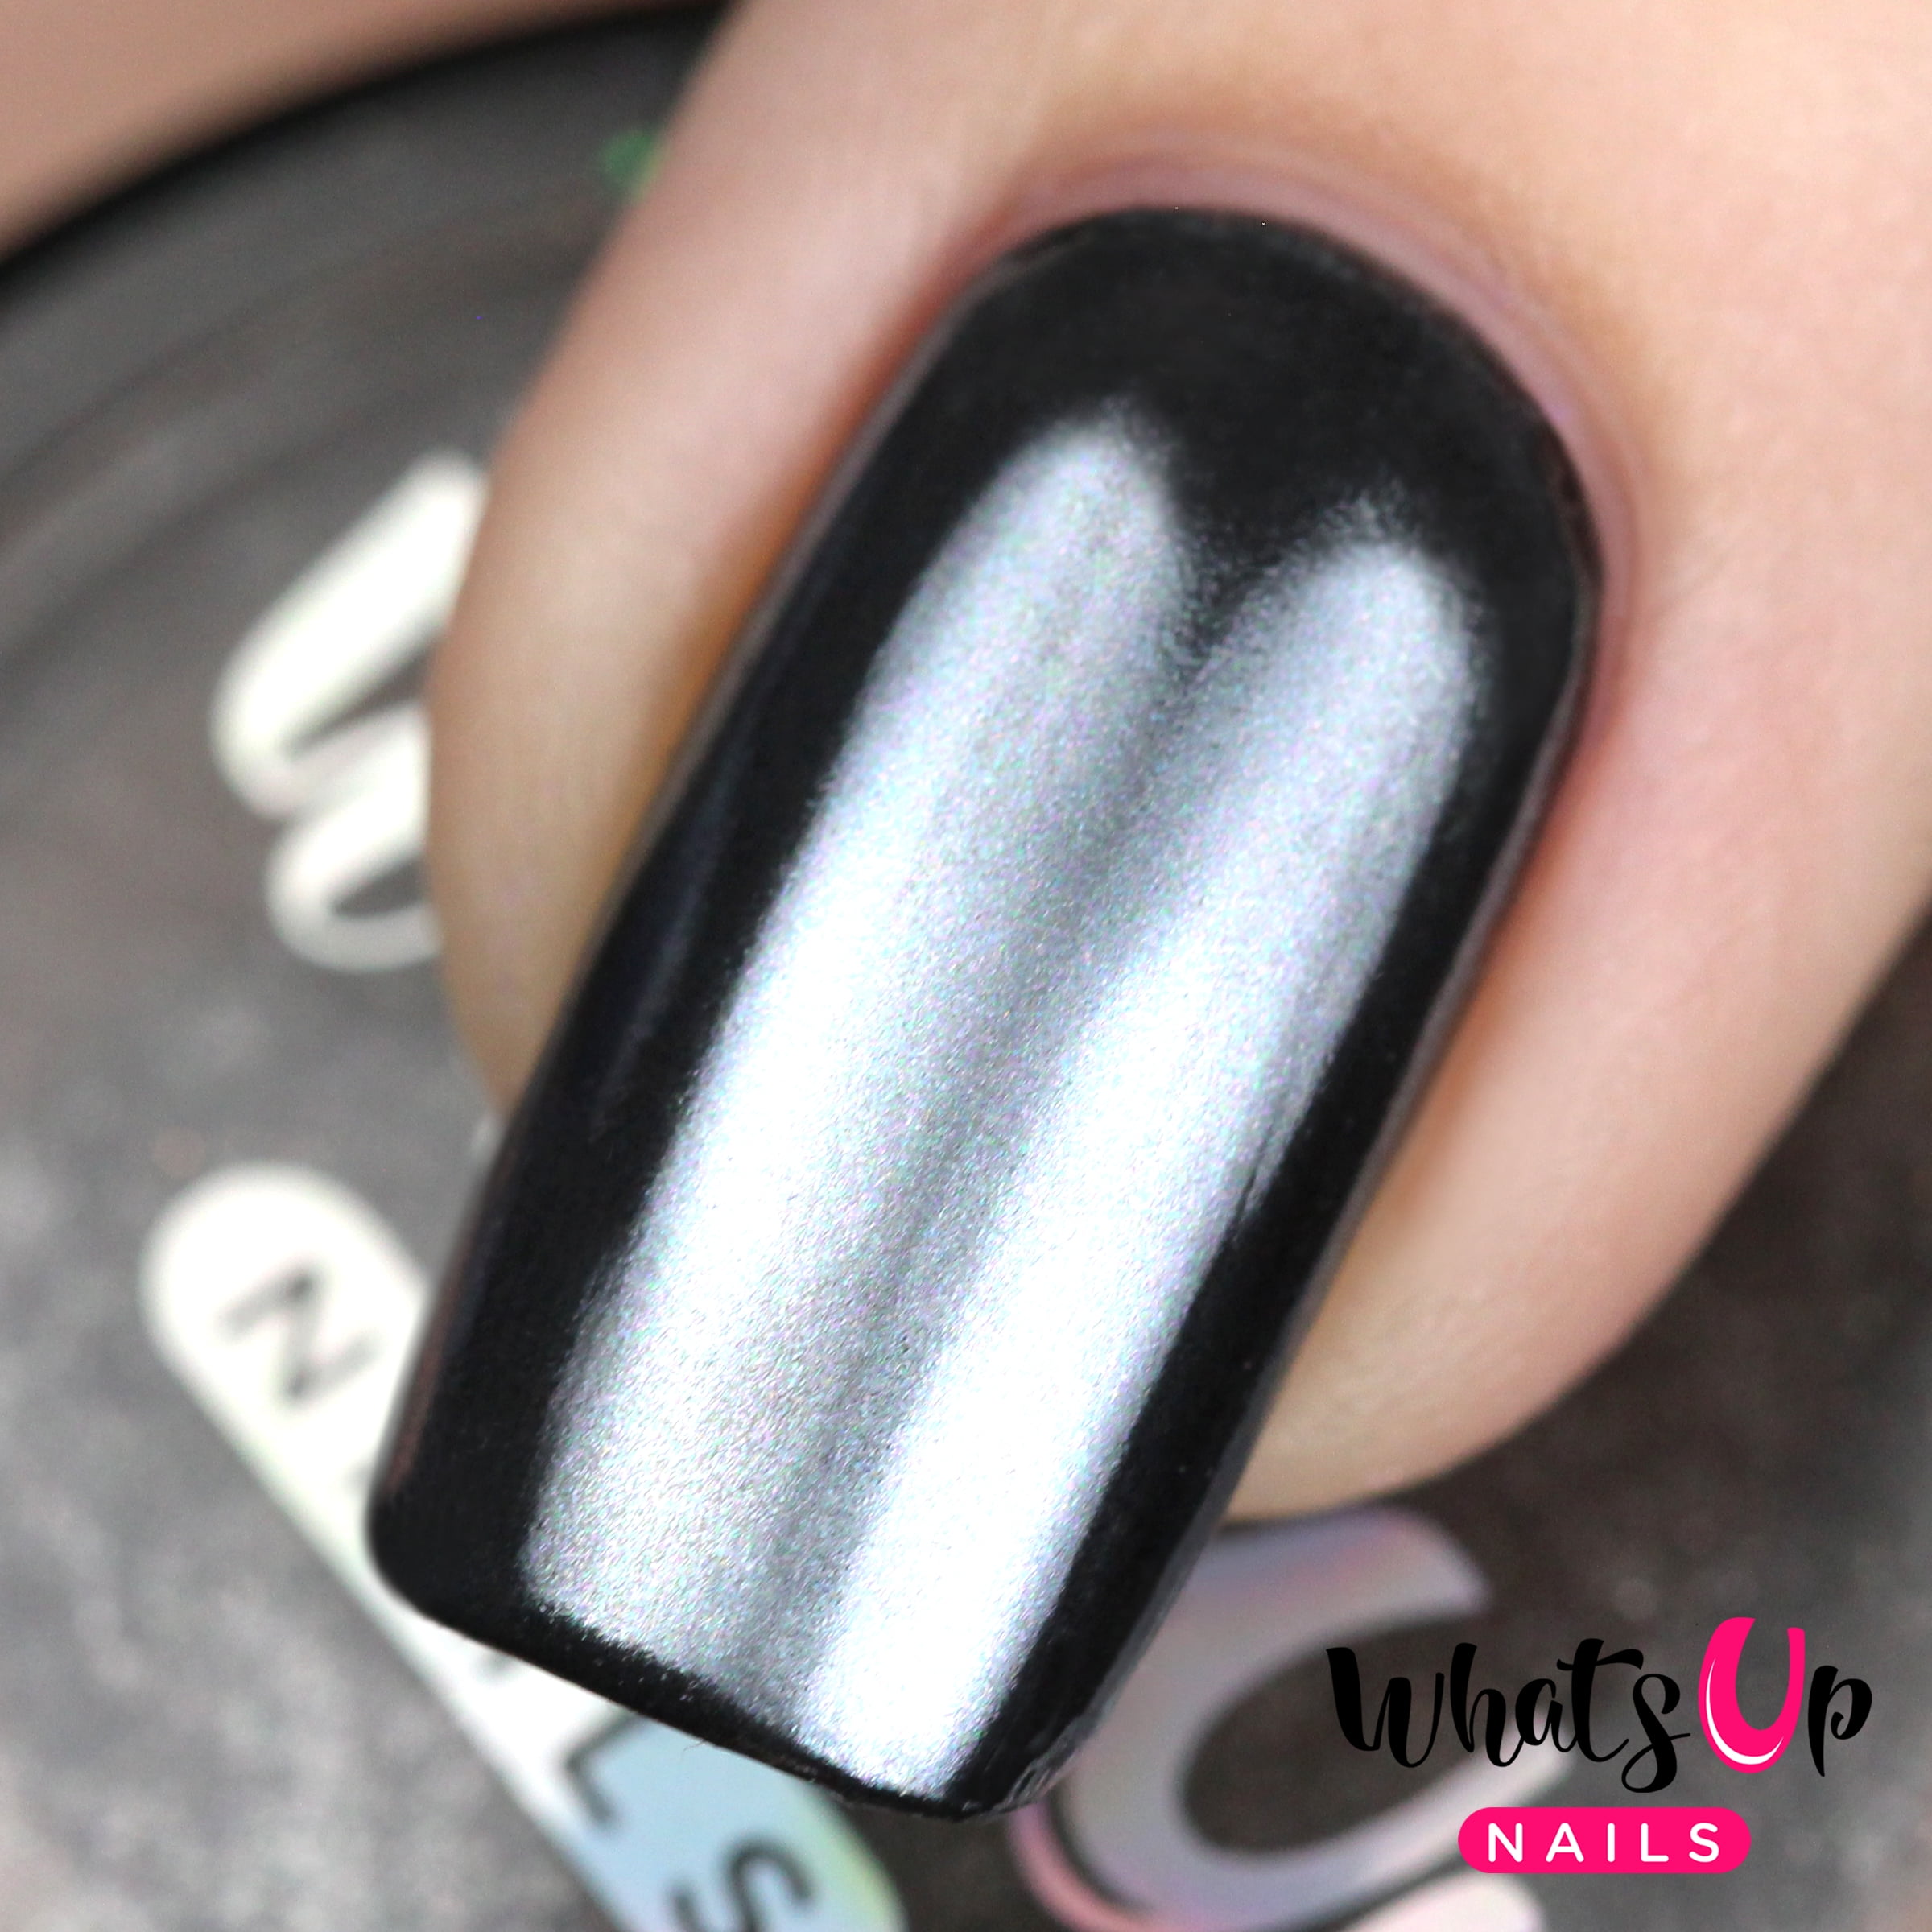 Whats Up Nails - Black Chrome Powder for Mirror Nails 